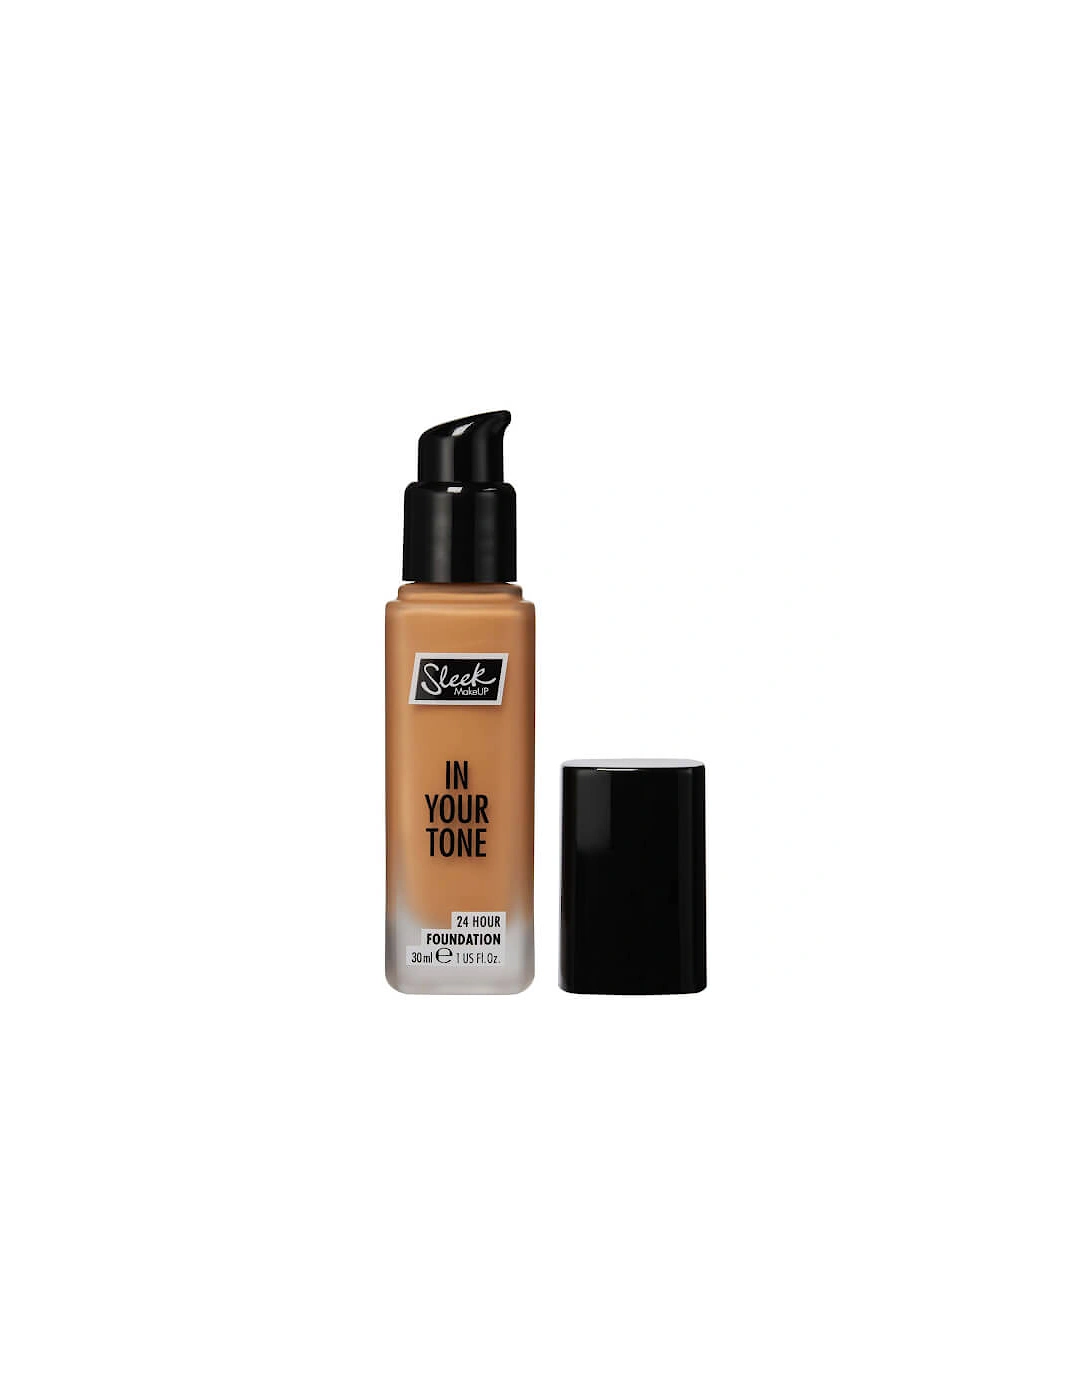 in Your Tone 24 Hour Foundation - 7N, 2 of 1